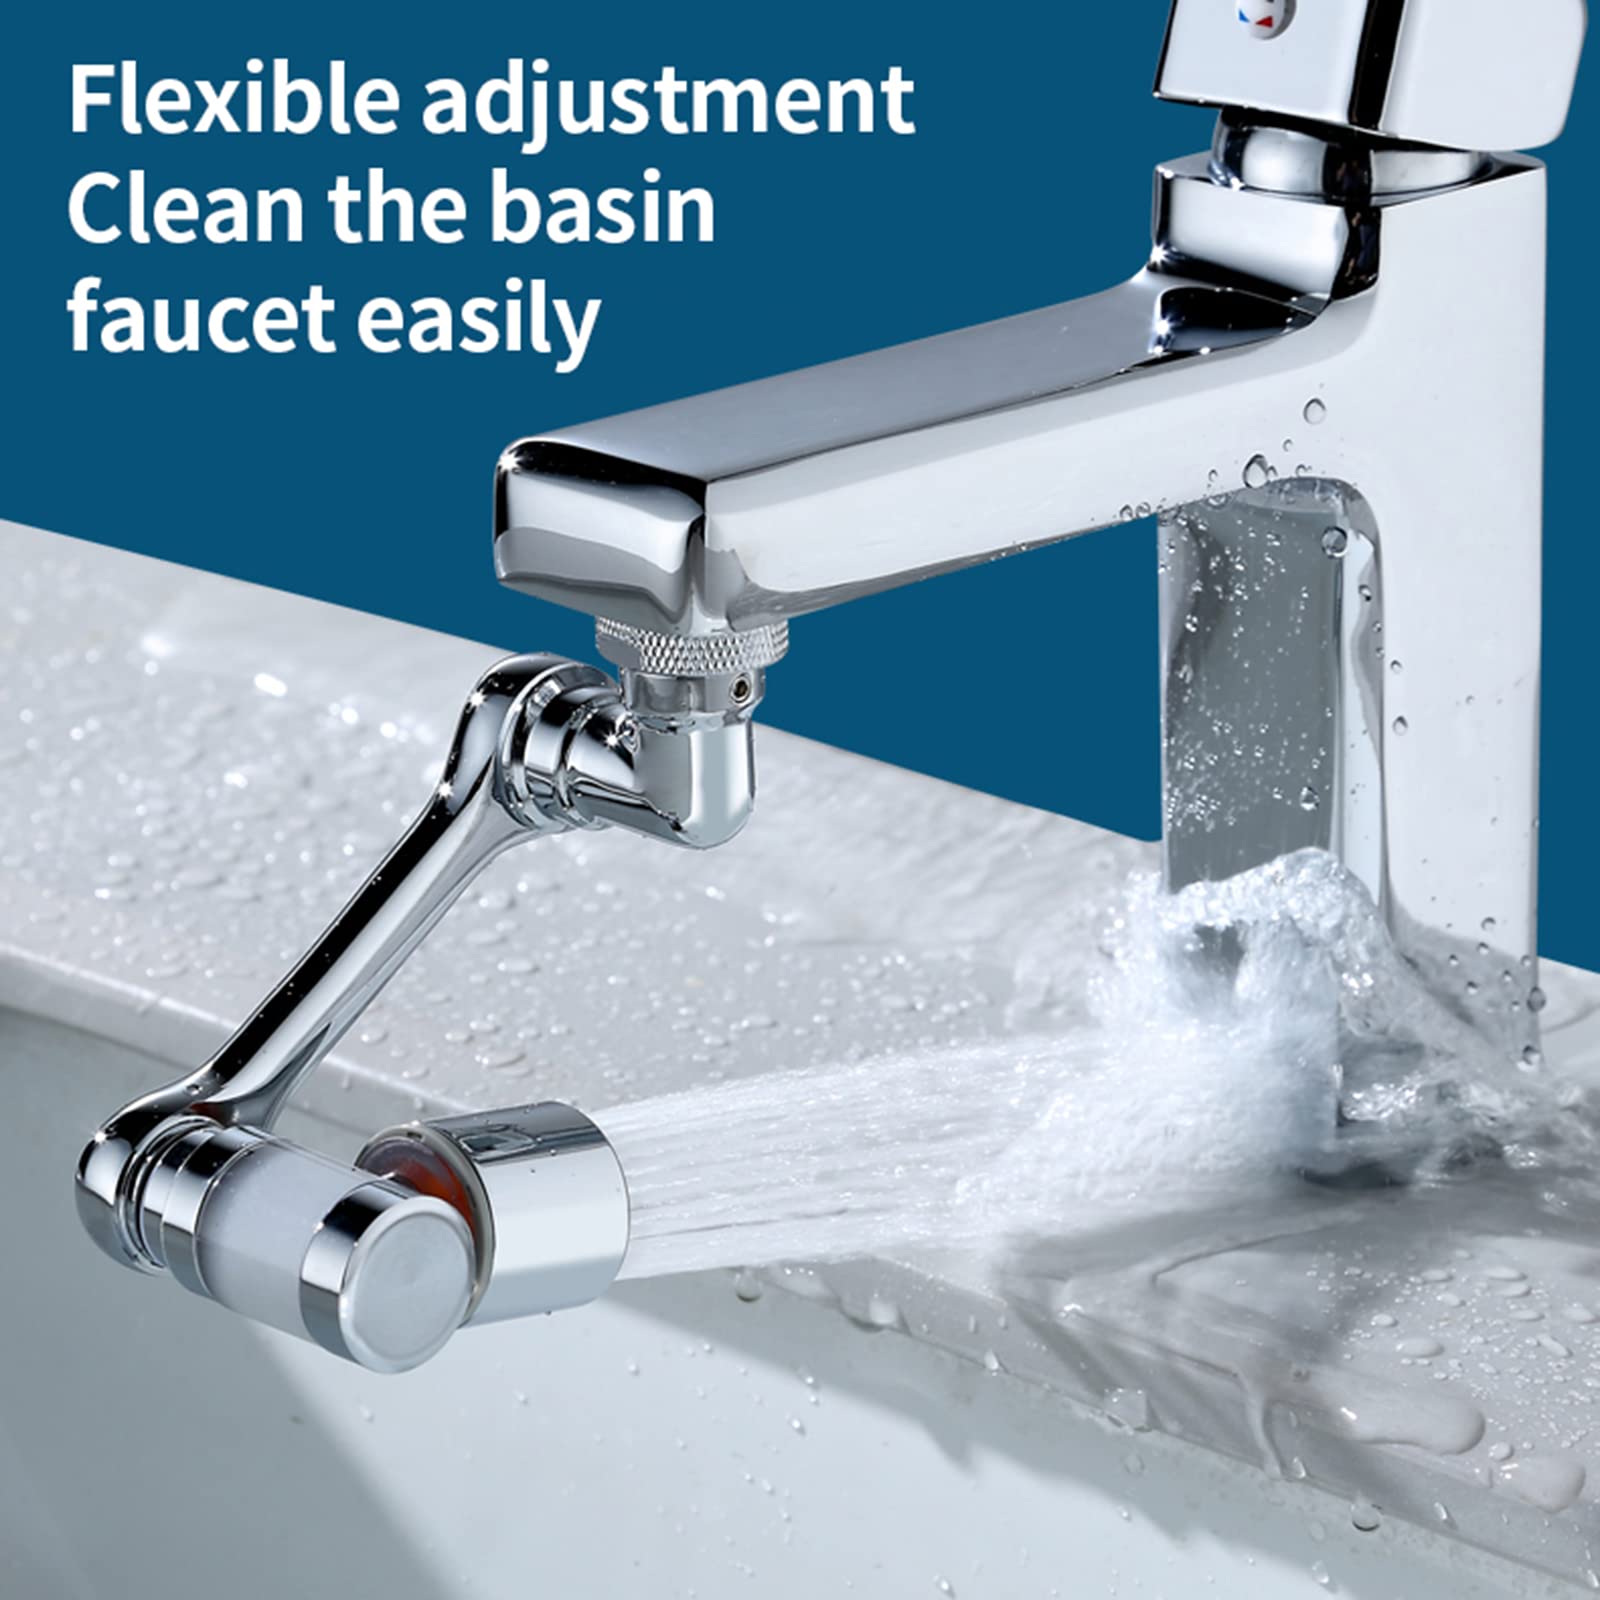 New Upgrade 1080° Rotating Filter Faucet Extender, PP Cotton Filter Faucet, Universal Splash Filter Faucet, Water Filter Faucet for Kitchen Bathroom, Swivel Faucet Aerator with 2 Water Outlet Modes